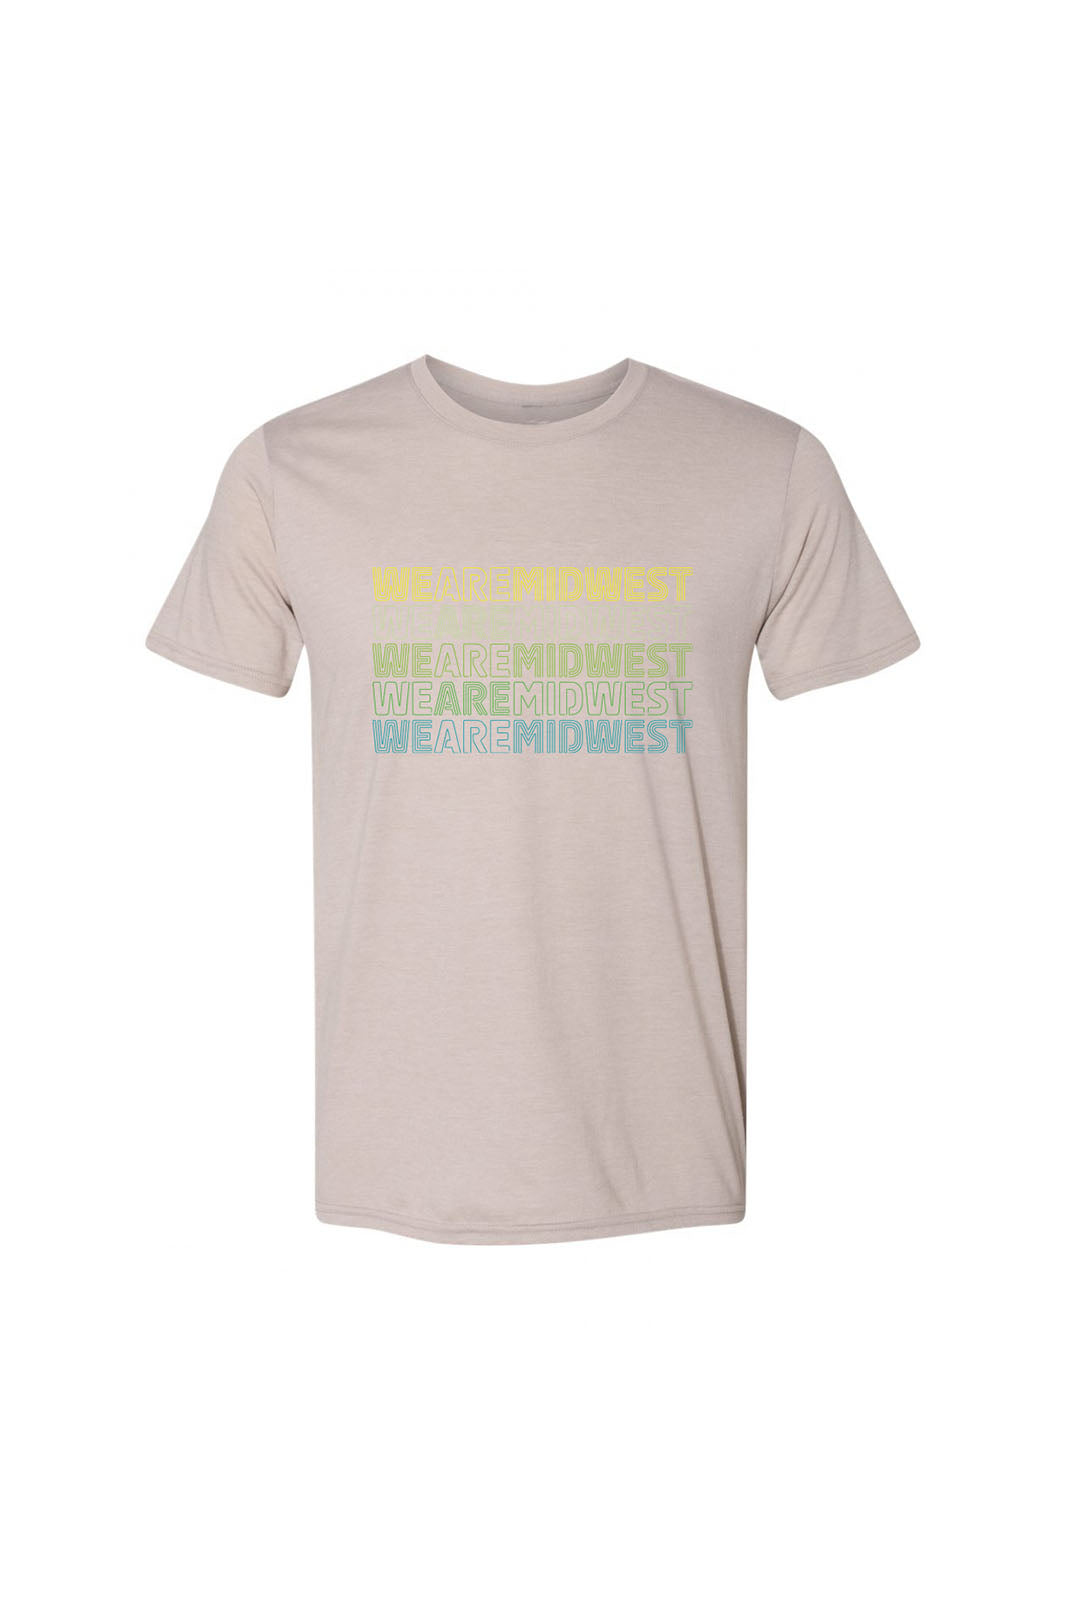 A khaki-slate t-shirt with yellow, lime green, and teal graphic artwork that says We Are Midwest, and original design by Cowboys and Astronauts.